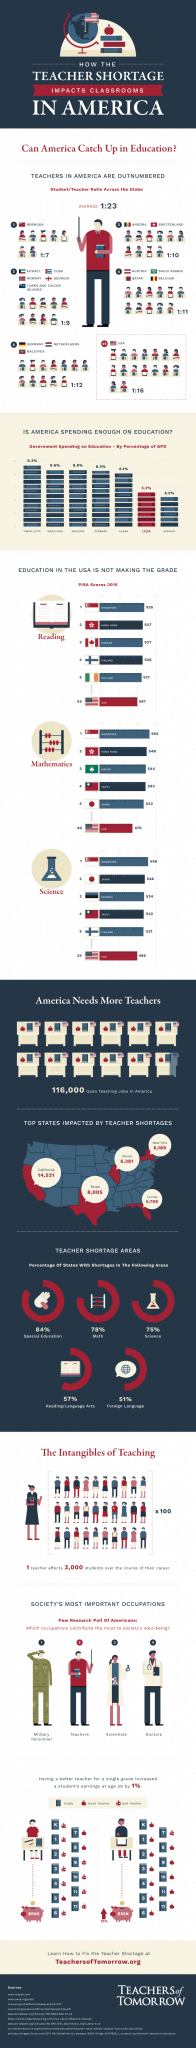 How The Teacher Shortage Impacts Classrooms In America